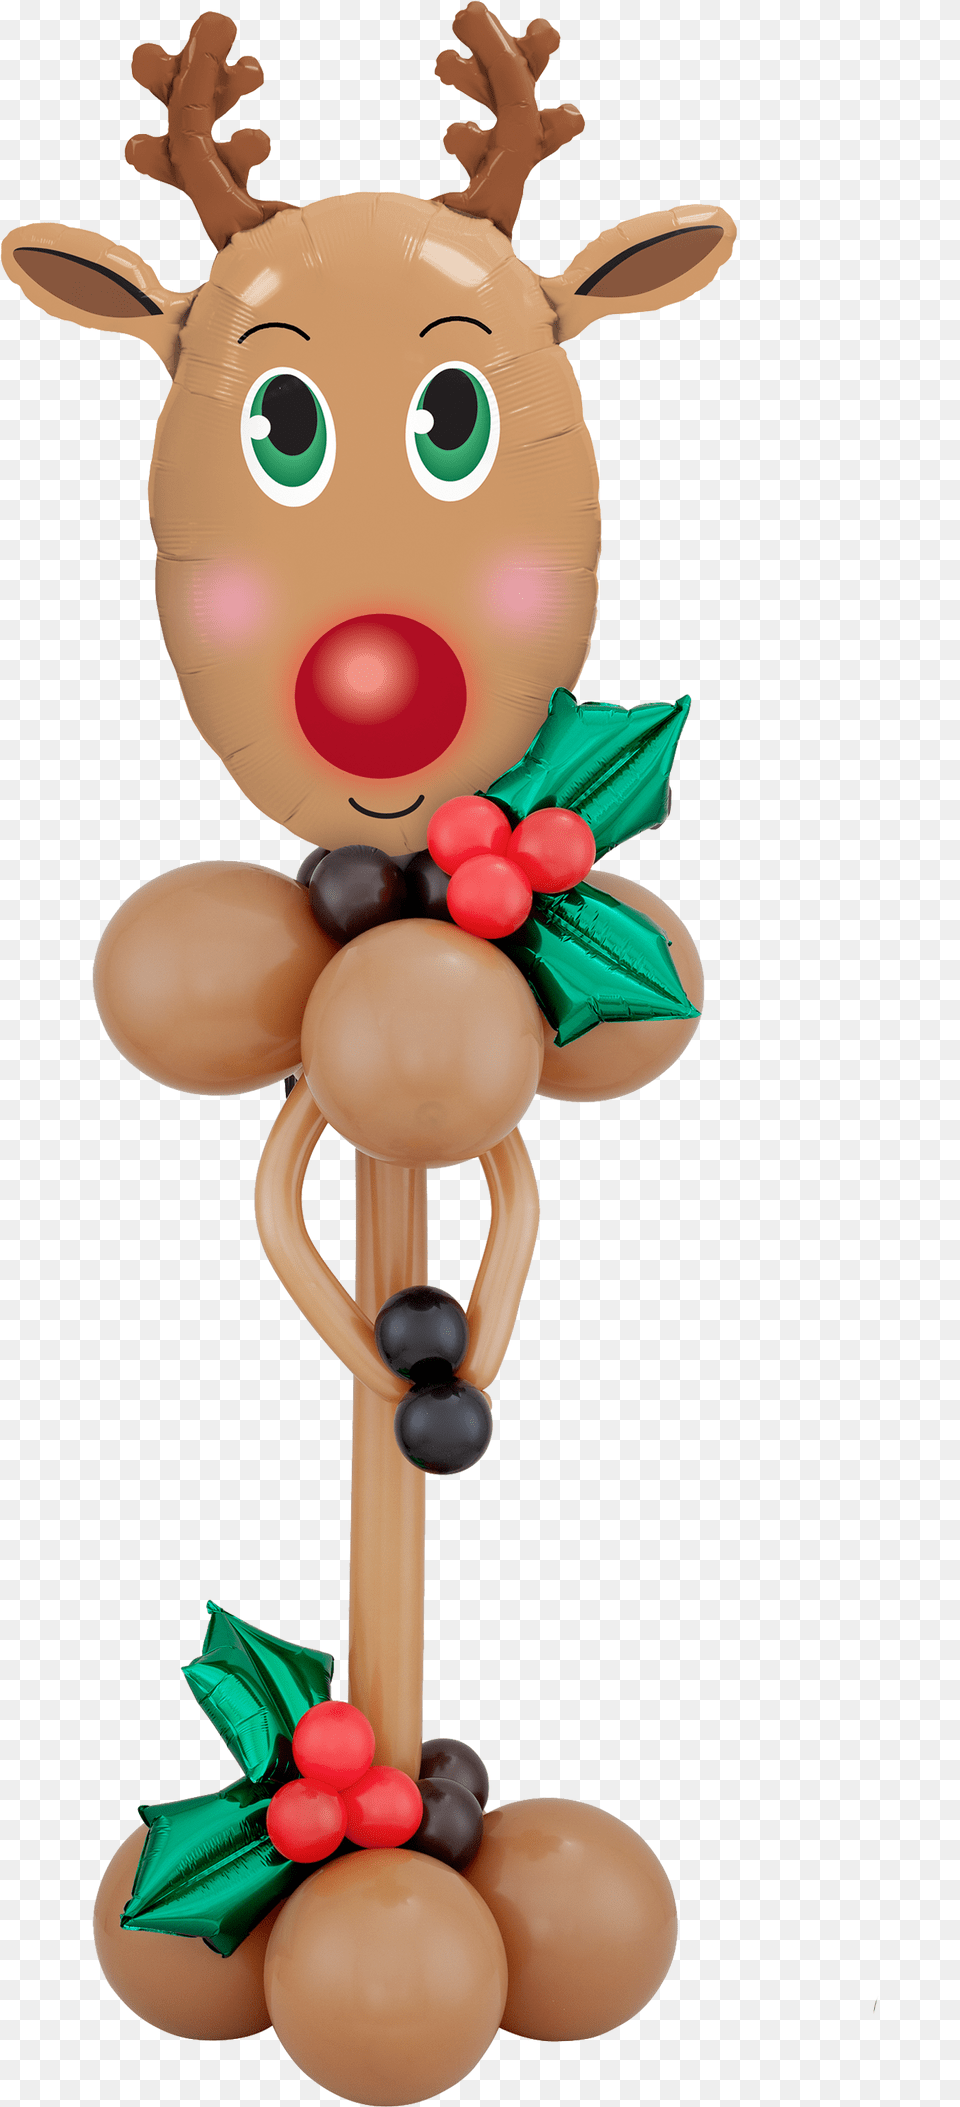 Red Nosed Reindeer Pedestal Balloon, Toy, Rattle Png Image